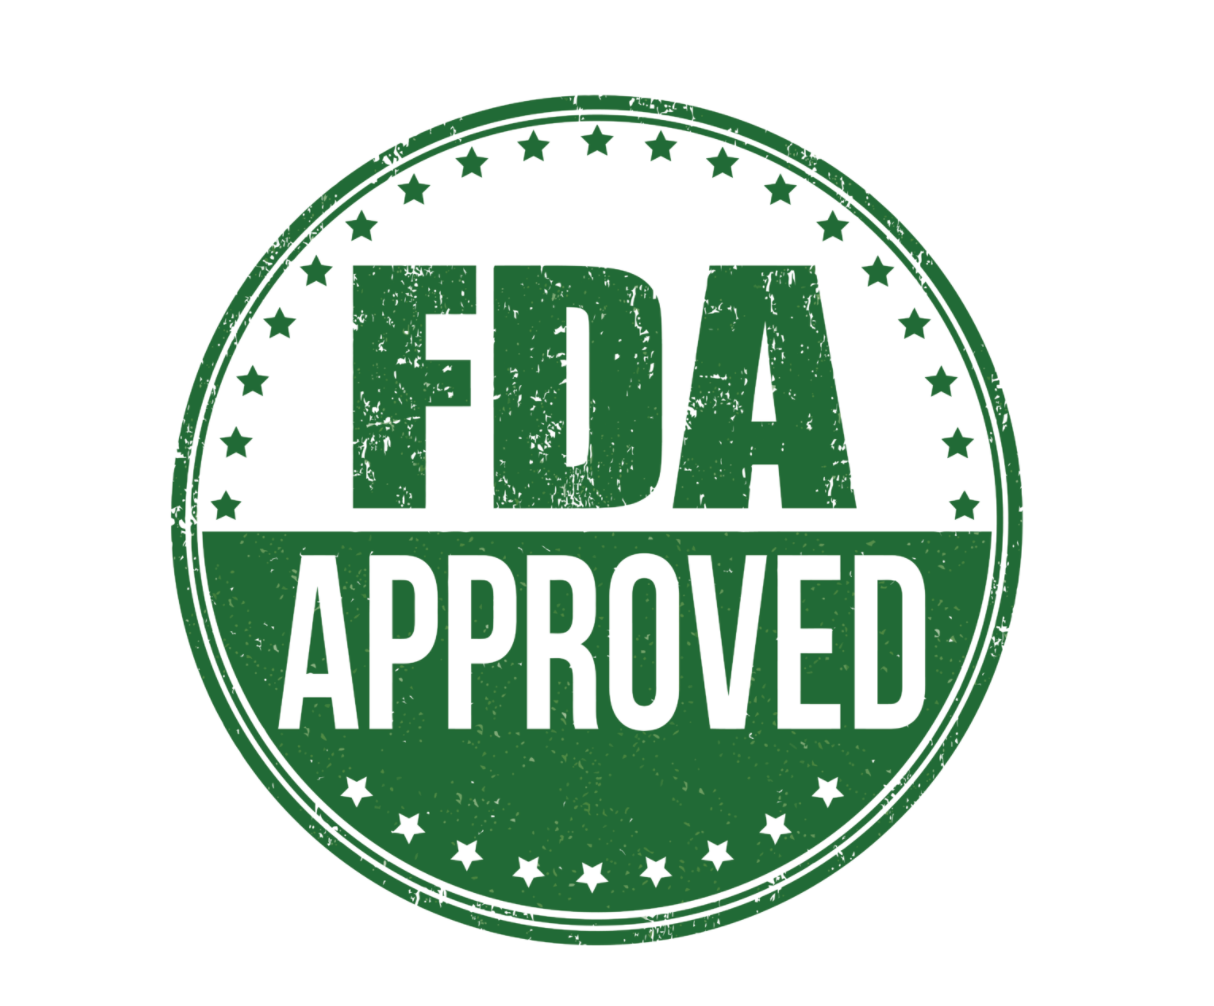 FDA Approves Daprodustat for Anemia From Chronic Kidney Disease in Adult Dialysis Patients